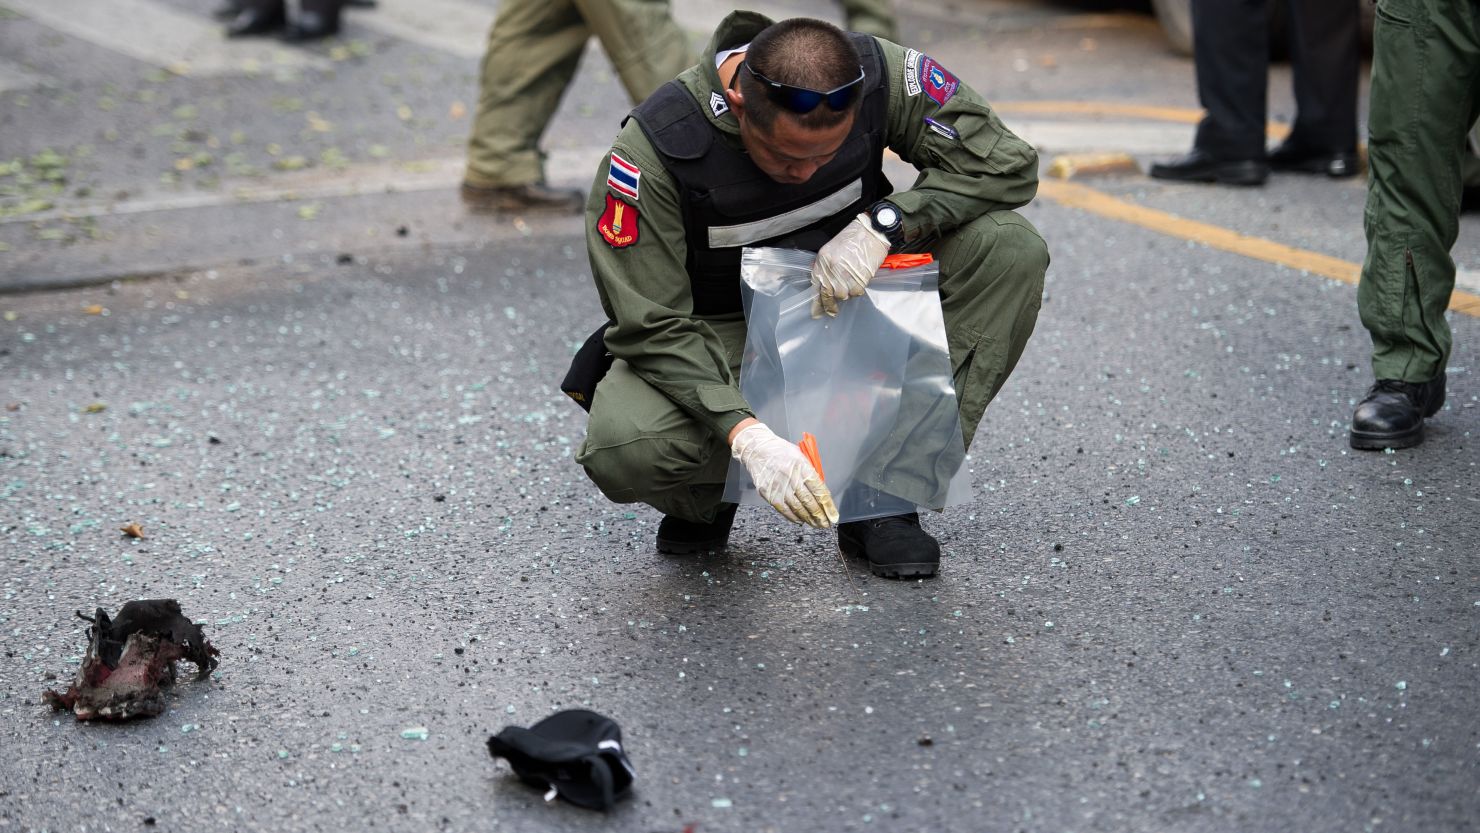 Thai bomb squad officials inspect the site of an explosion in Bangkok on February 14, 2012.